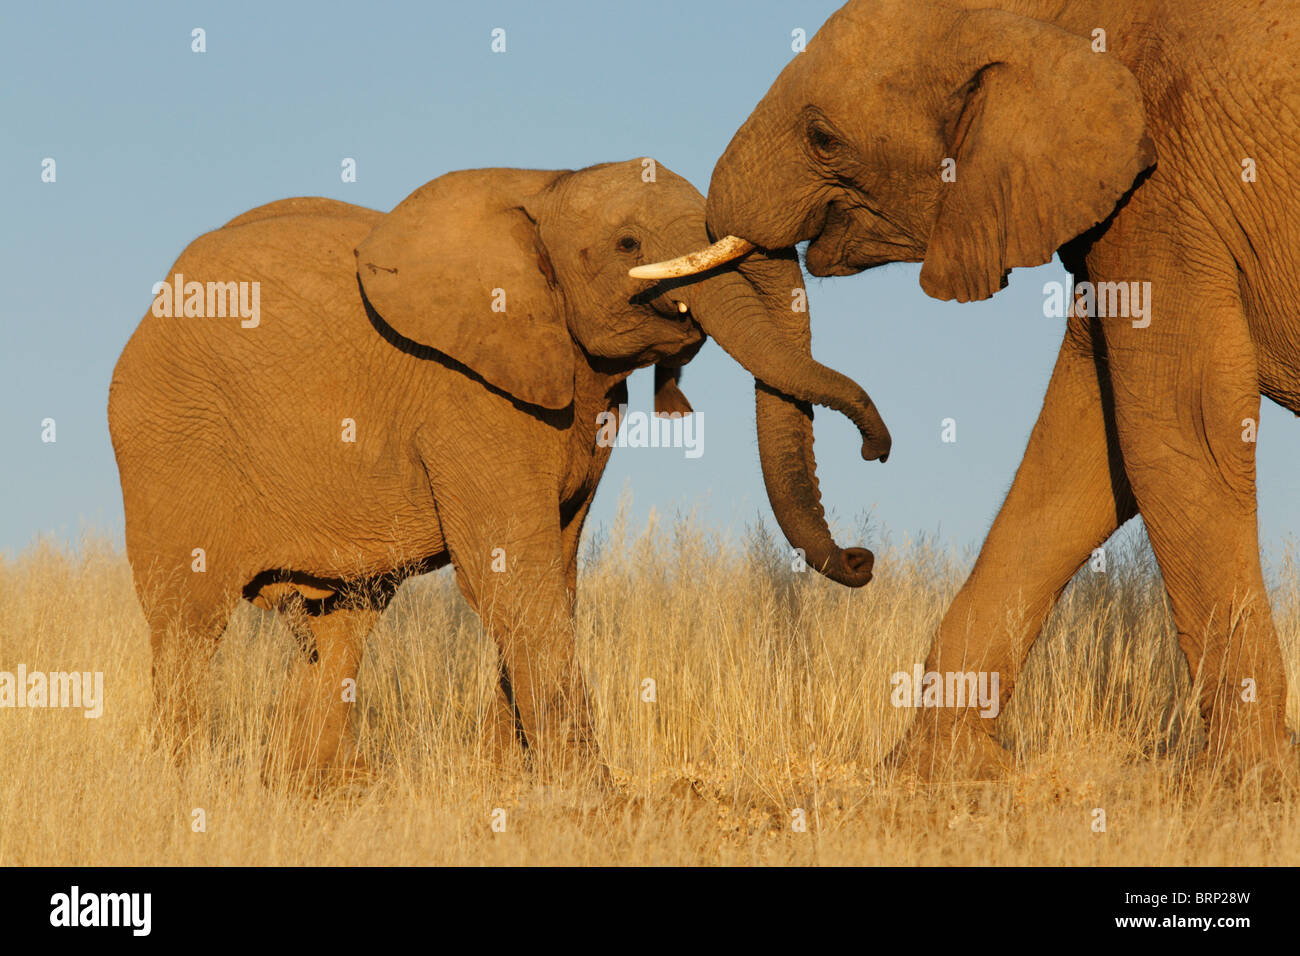 Elephant mother and calf play fighting Stock Photo